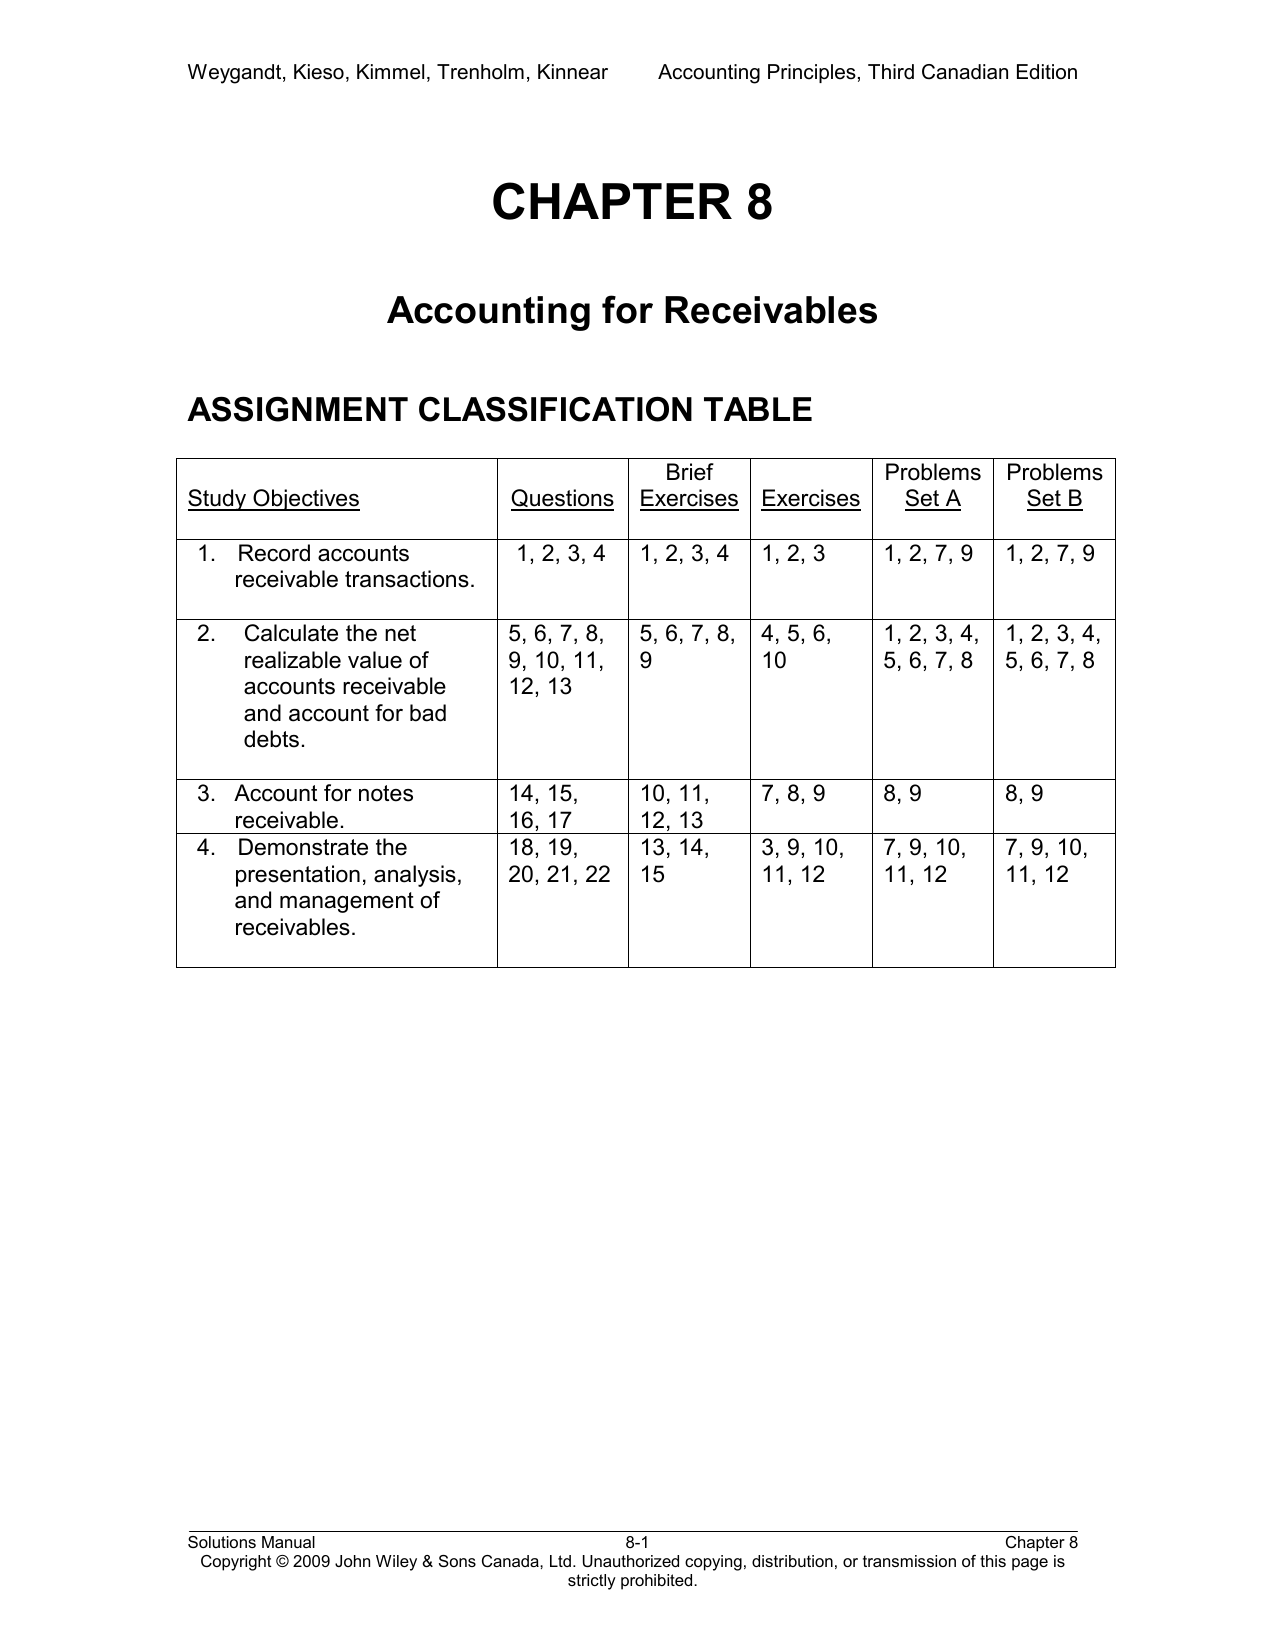 Wiley Plus Accounting Principles Answer Key 2019 Ebook